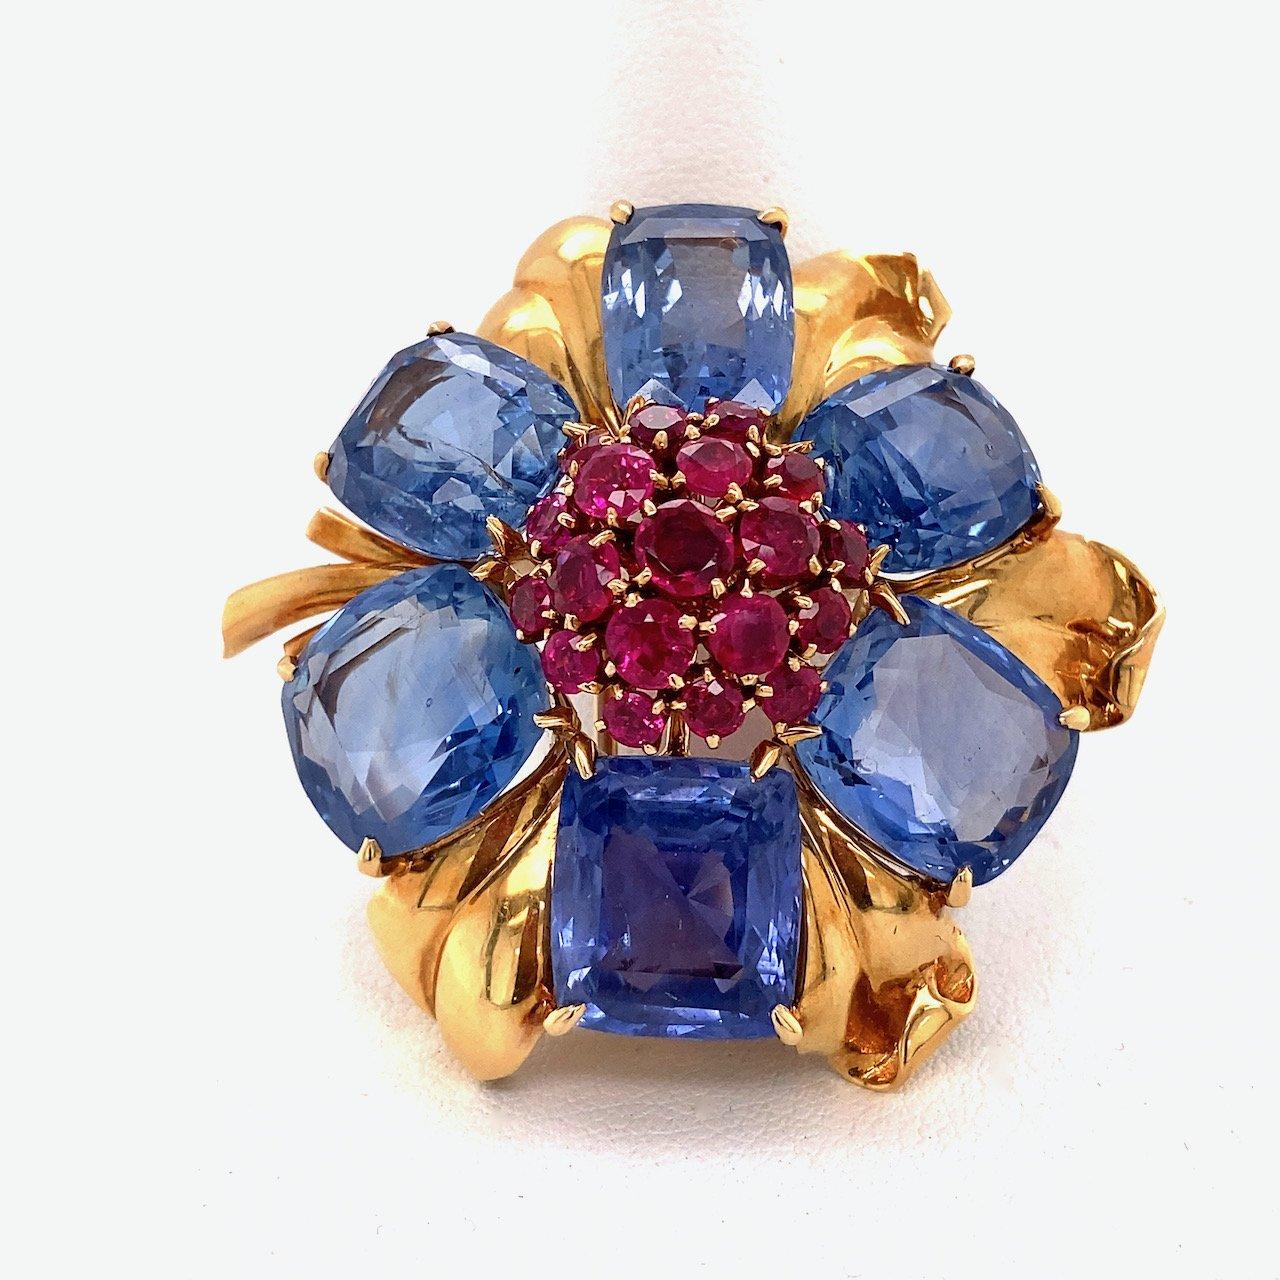 Retro Vintage Van Cleef & Arpels Blue Sapphire & Ruby Brooch, 18KT Yellow Gold For Sale